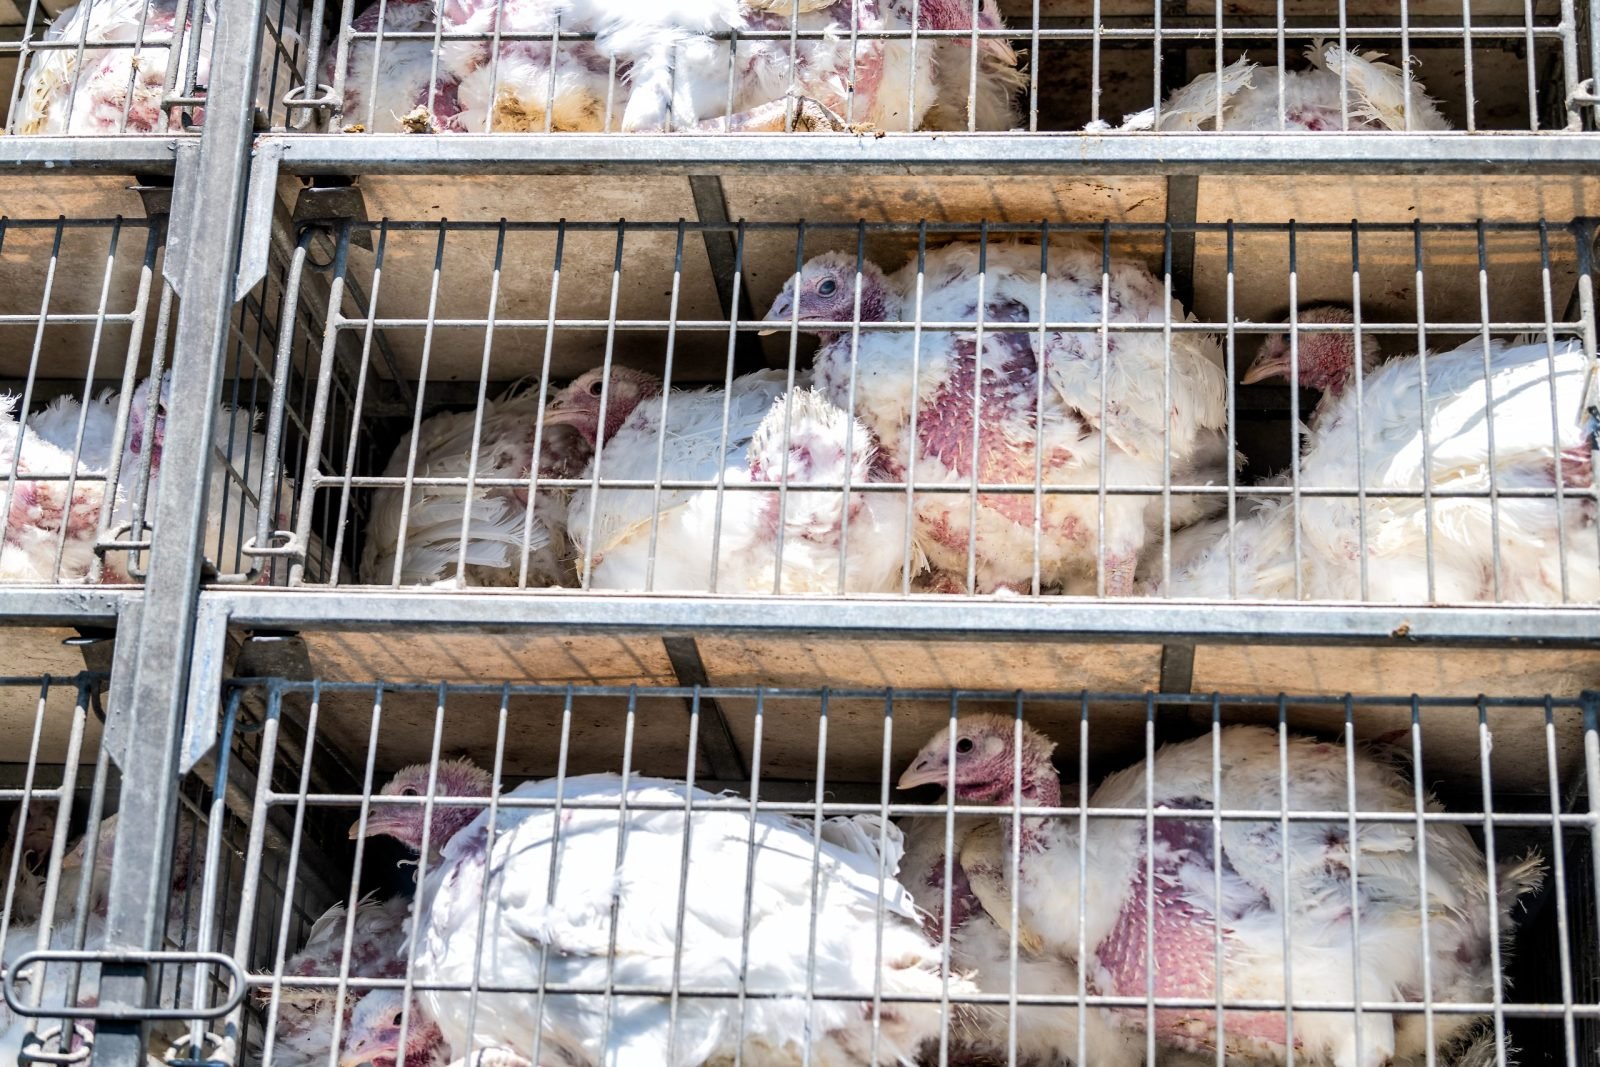 Turks are crowded in a cage on a factory farm.